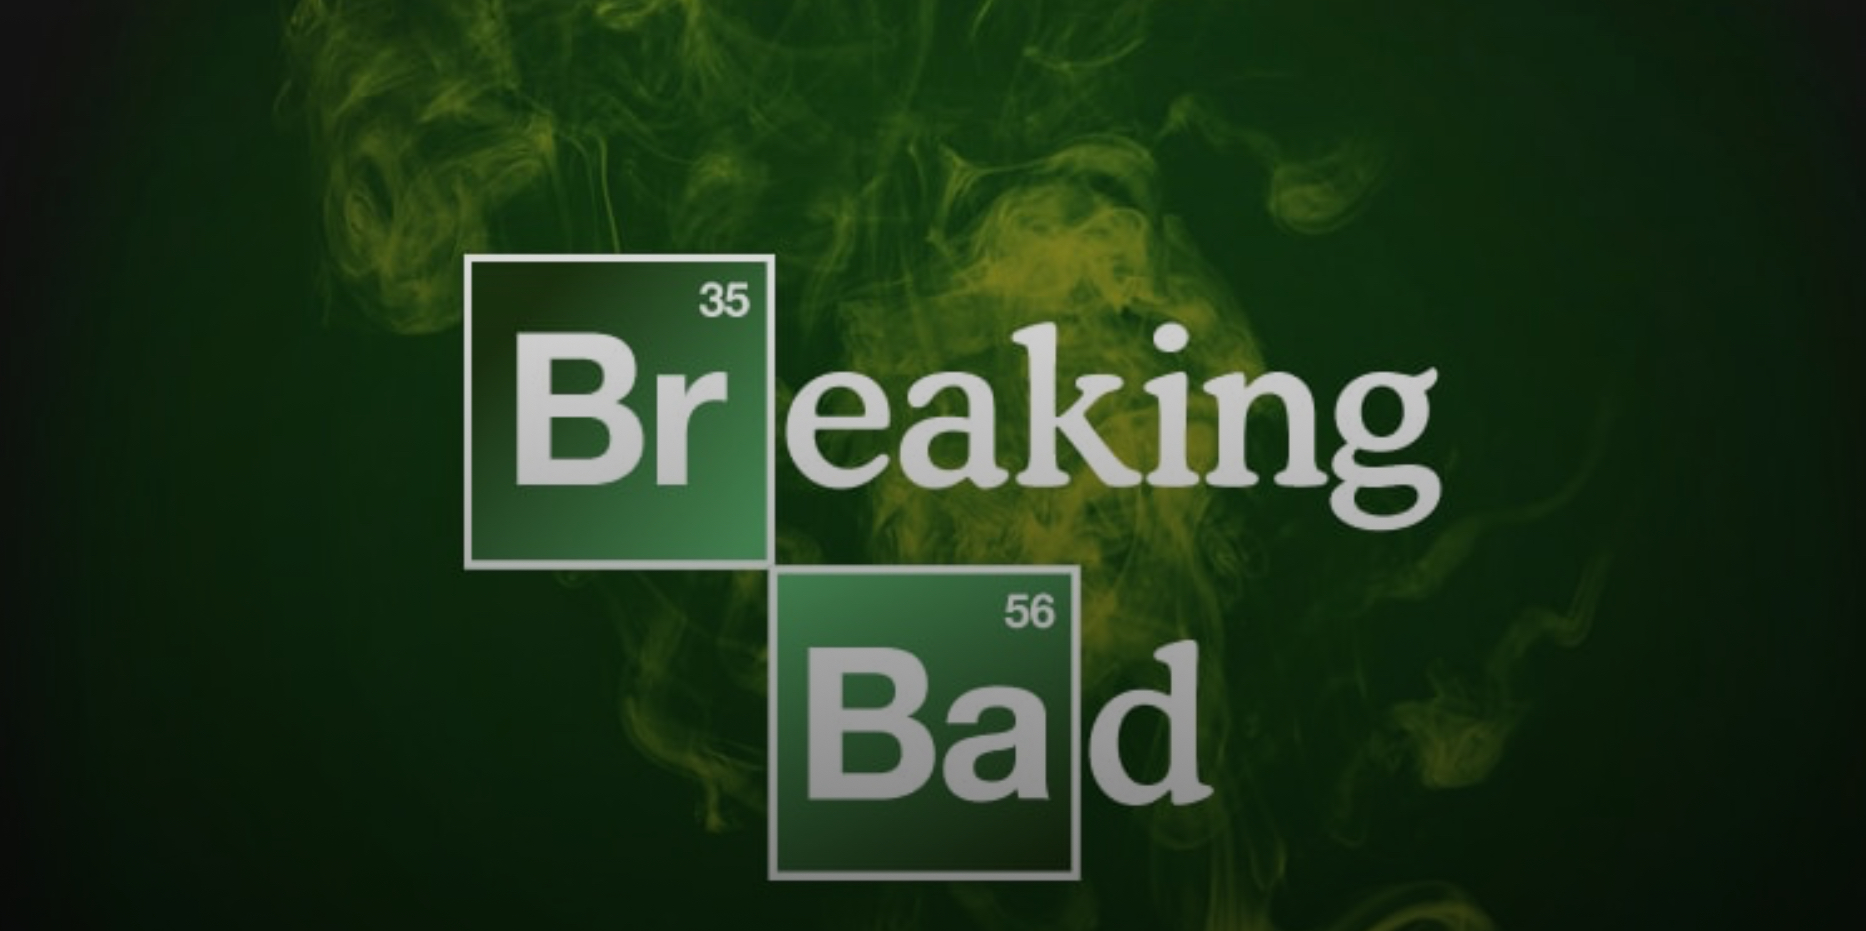 breaking-bad-criminal-elements-is-a-free-to-play-strategy-focused-mobile-game-based-on